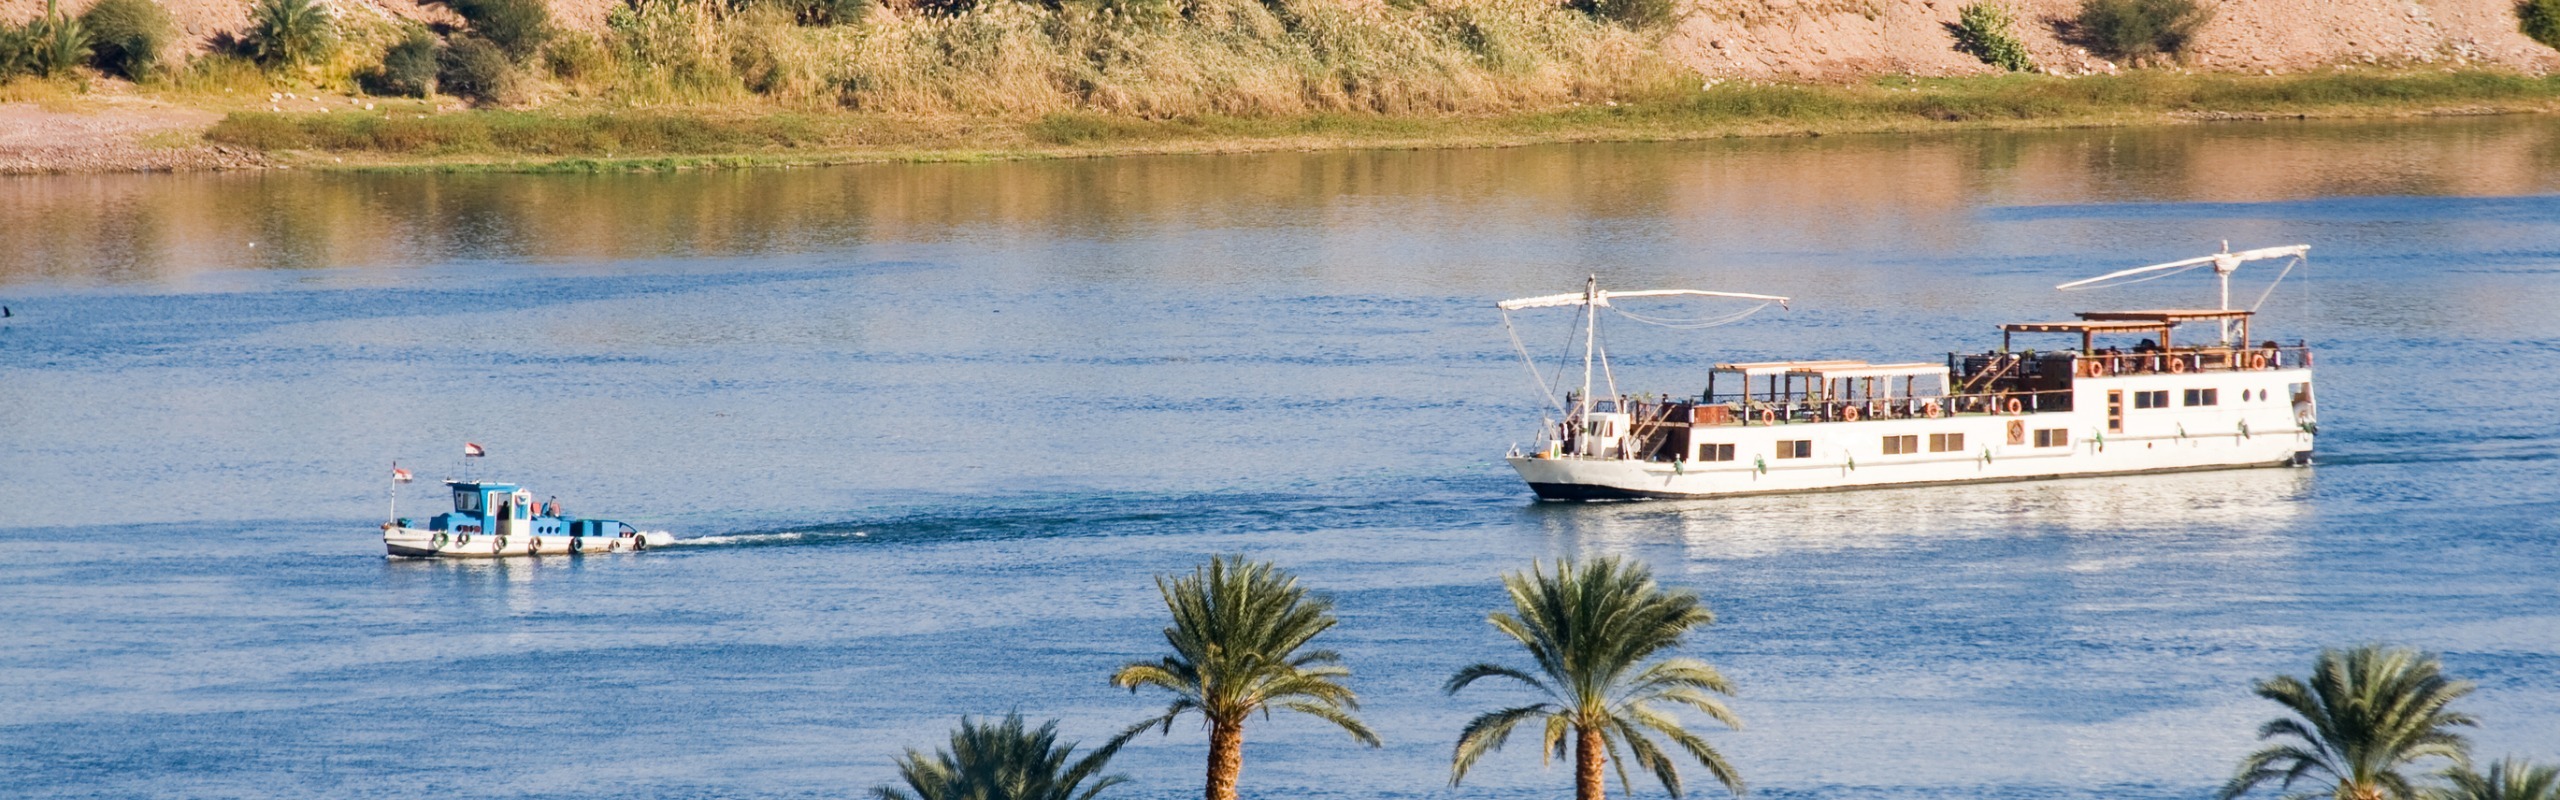 9-Day Essential Egypt Tour with Nile Cruise